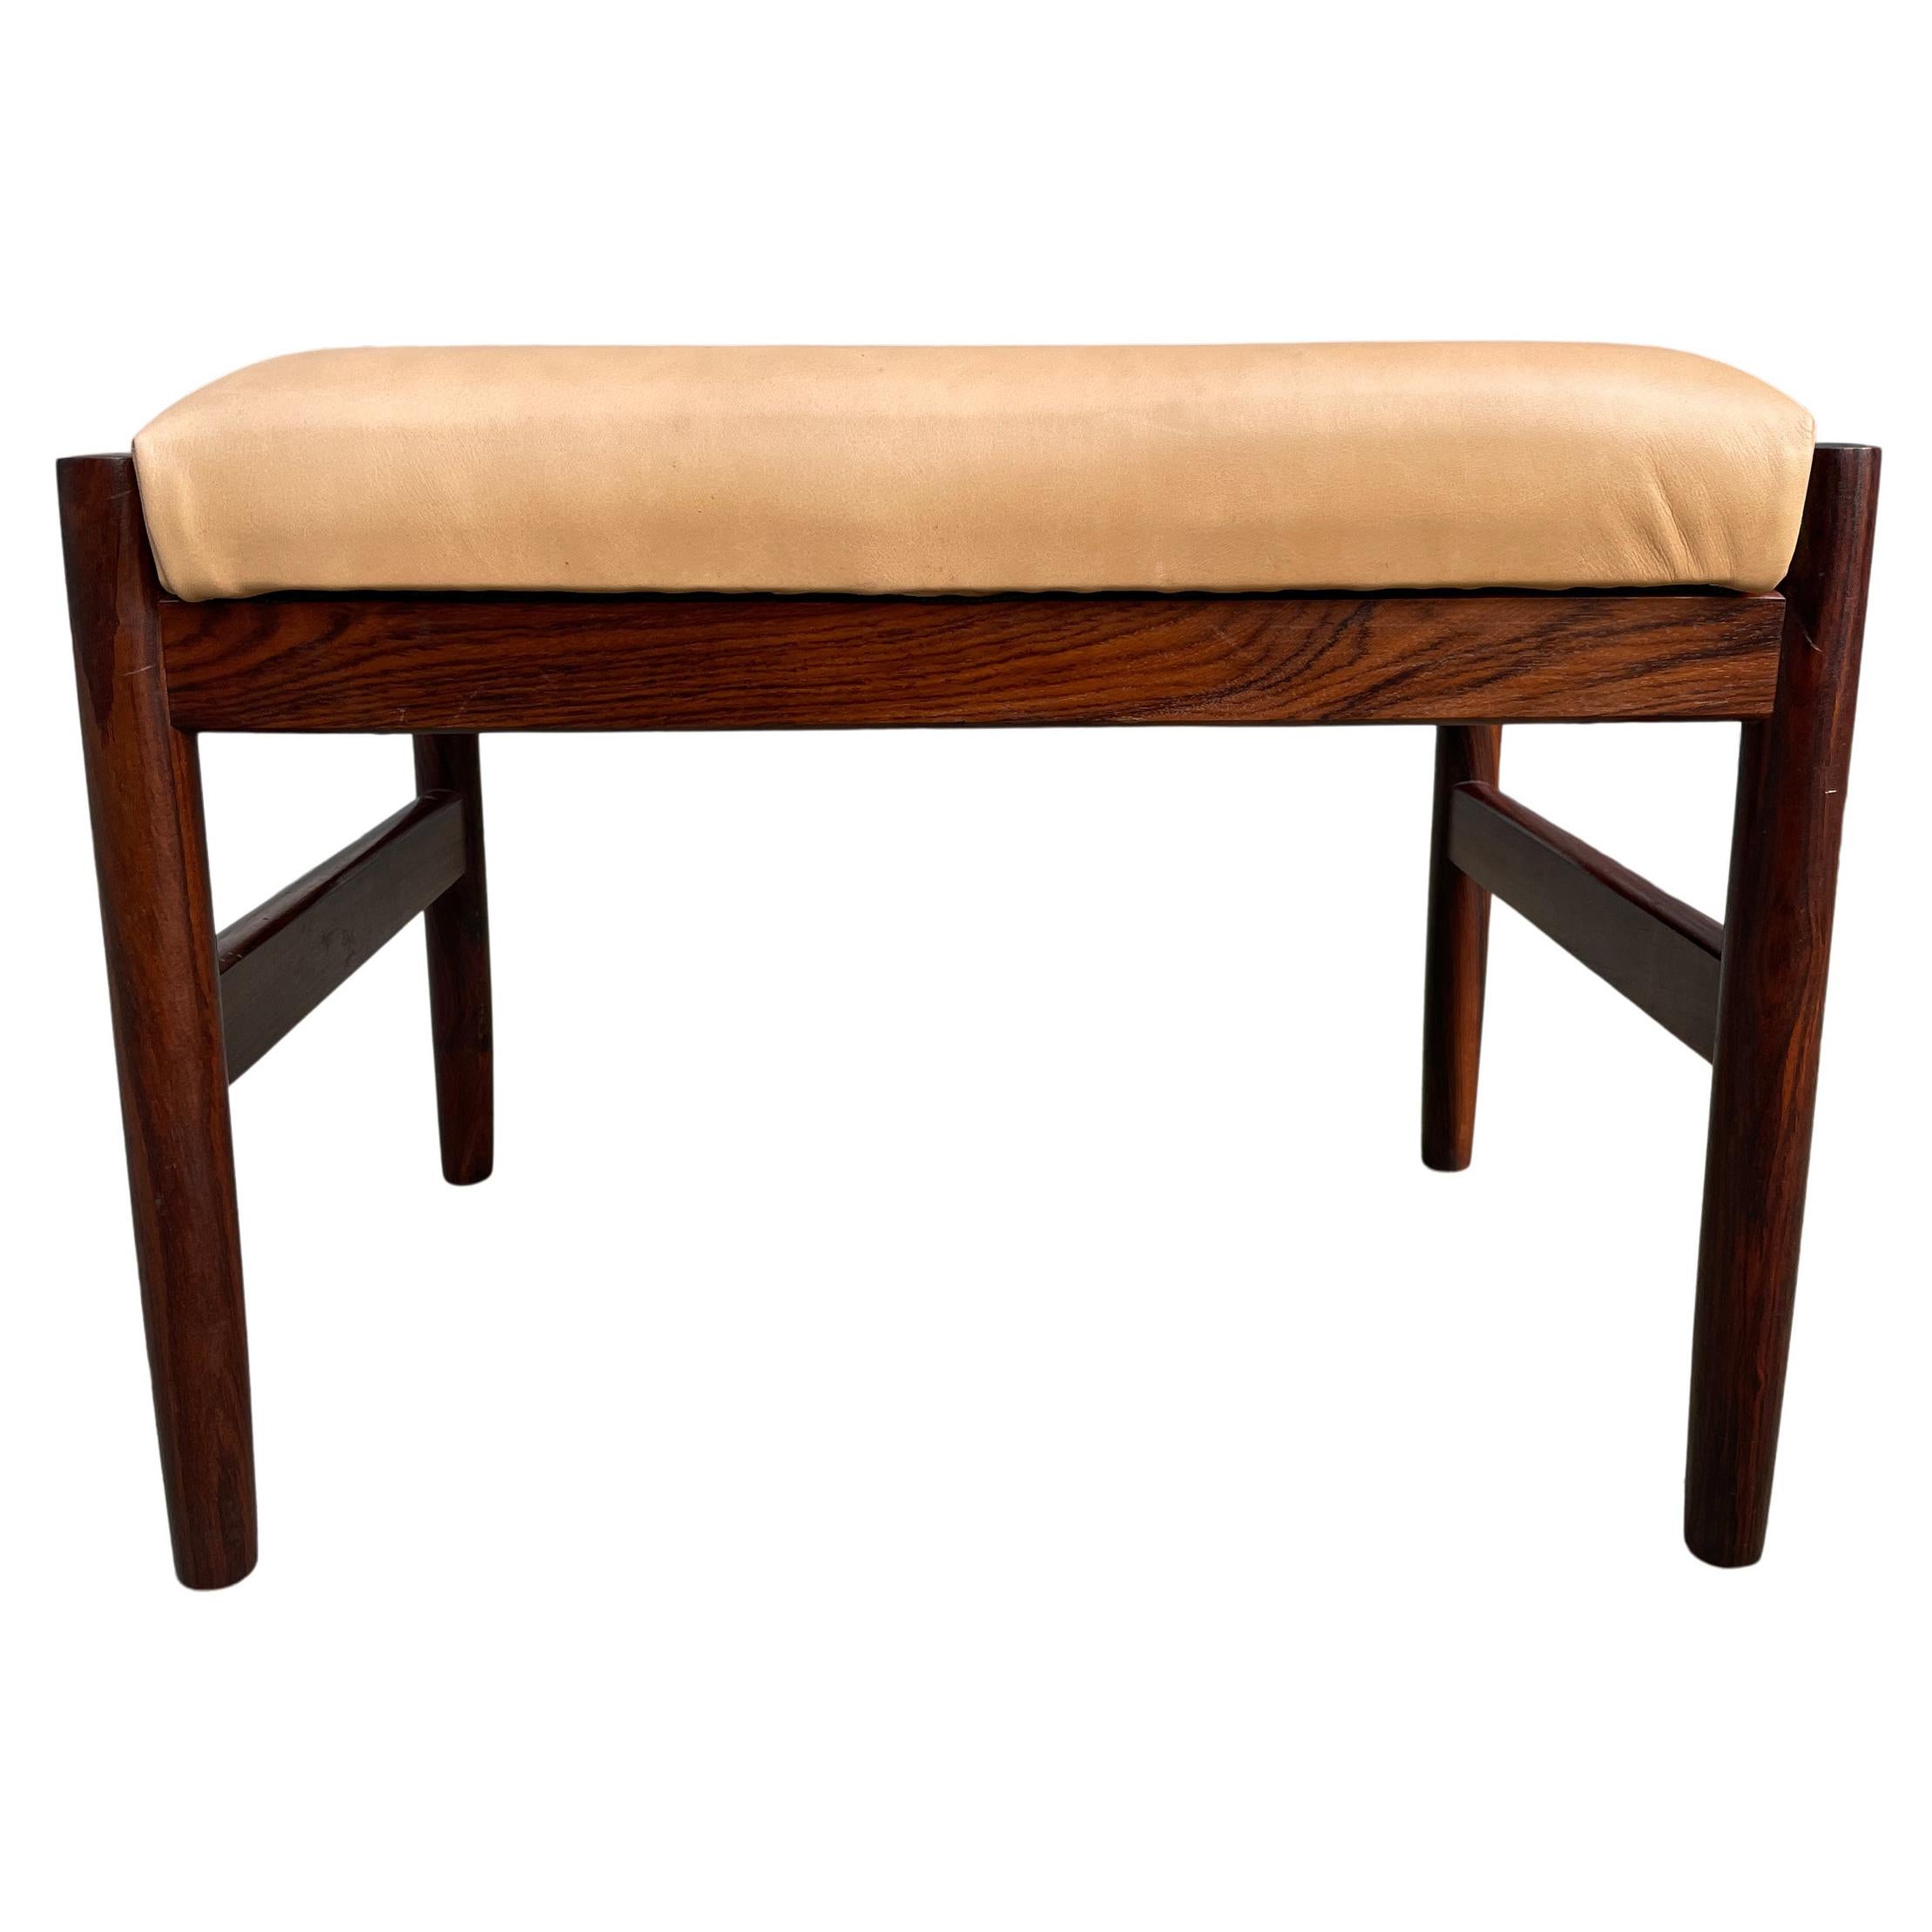 Mid Century Danish Modern Rosewood and Leather Small Stool Spottrup Mobler